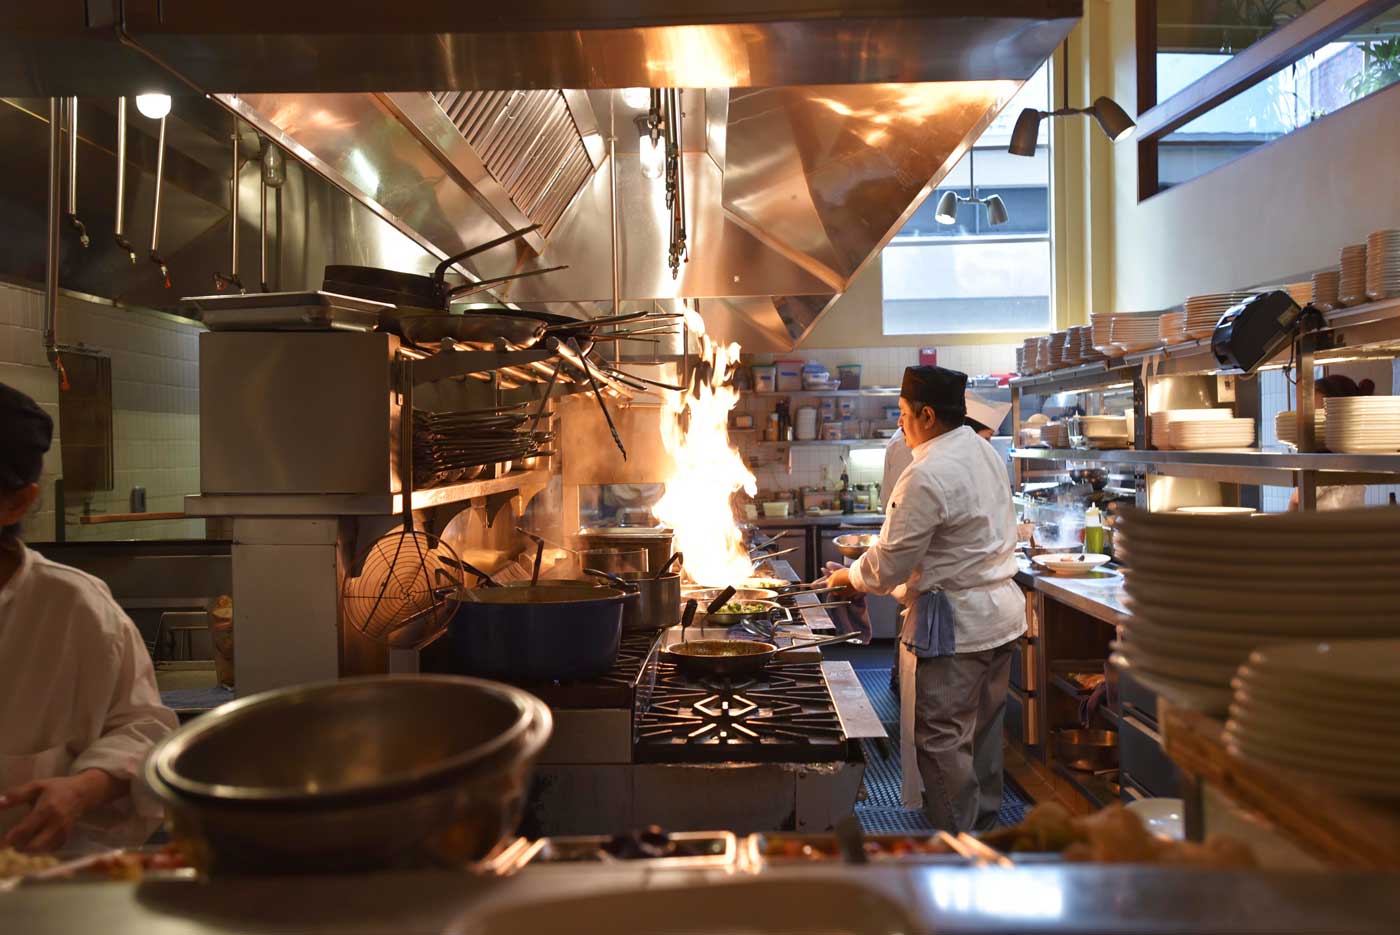 Meals are seared in open flame at Perbacco.